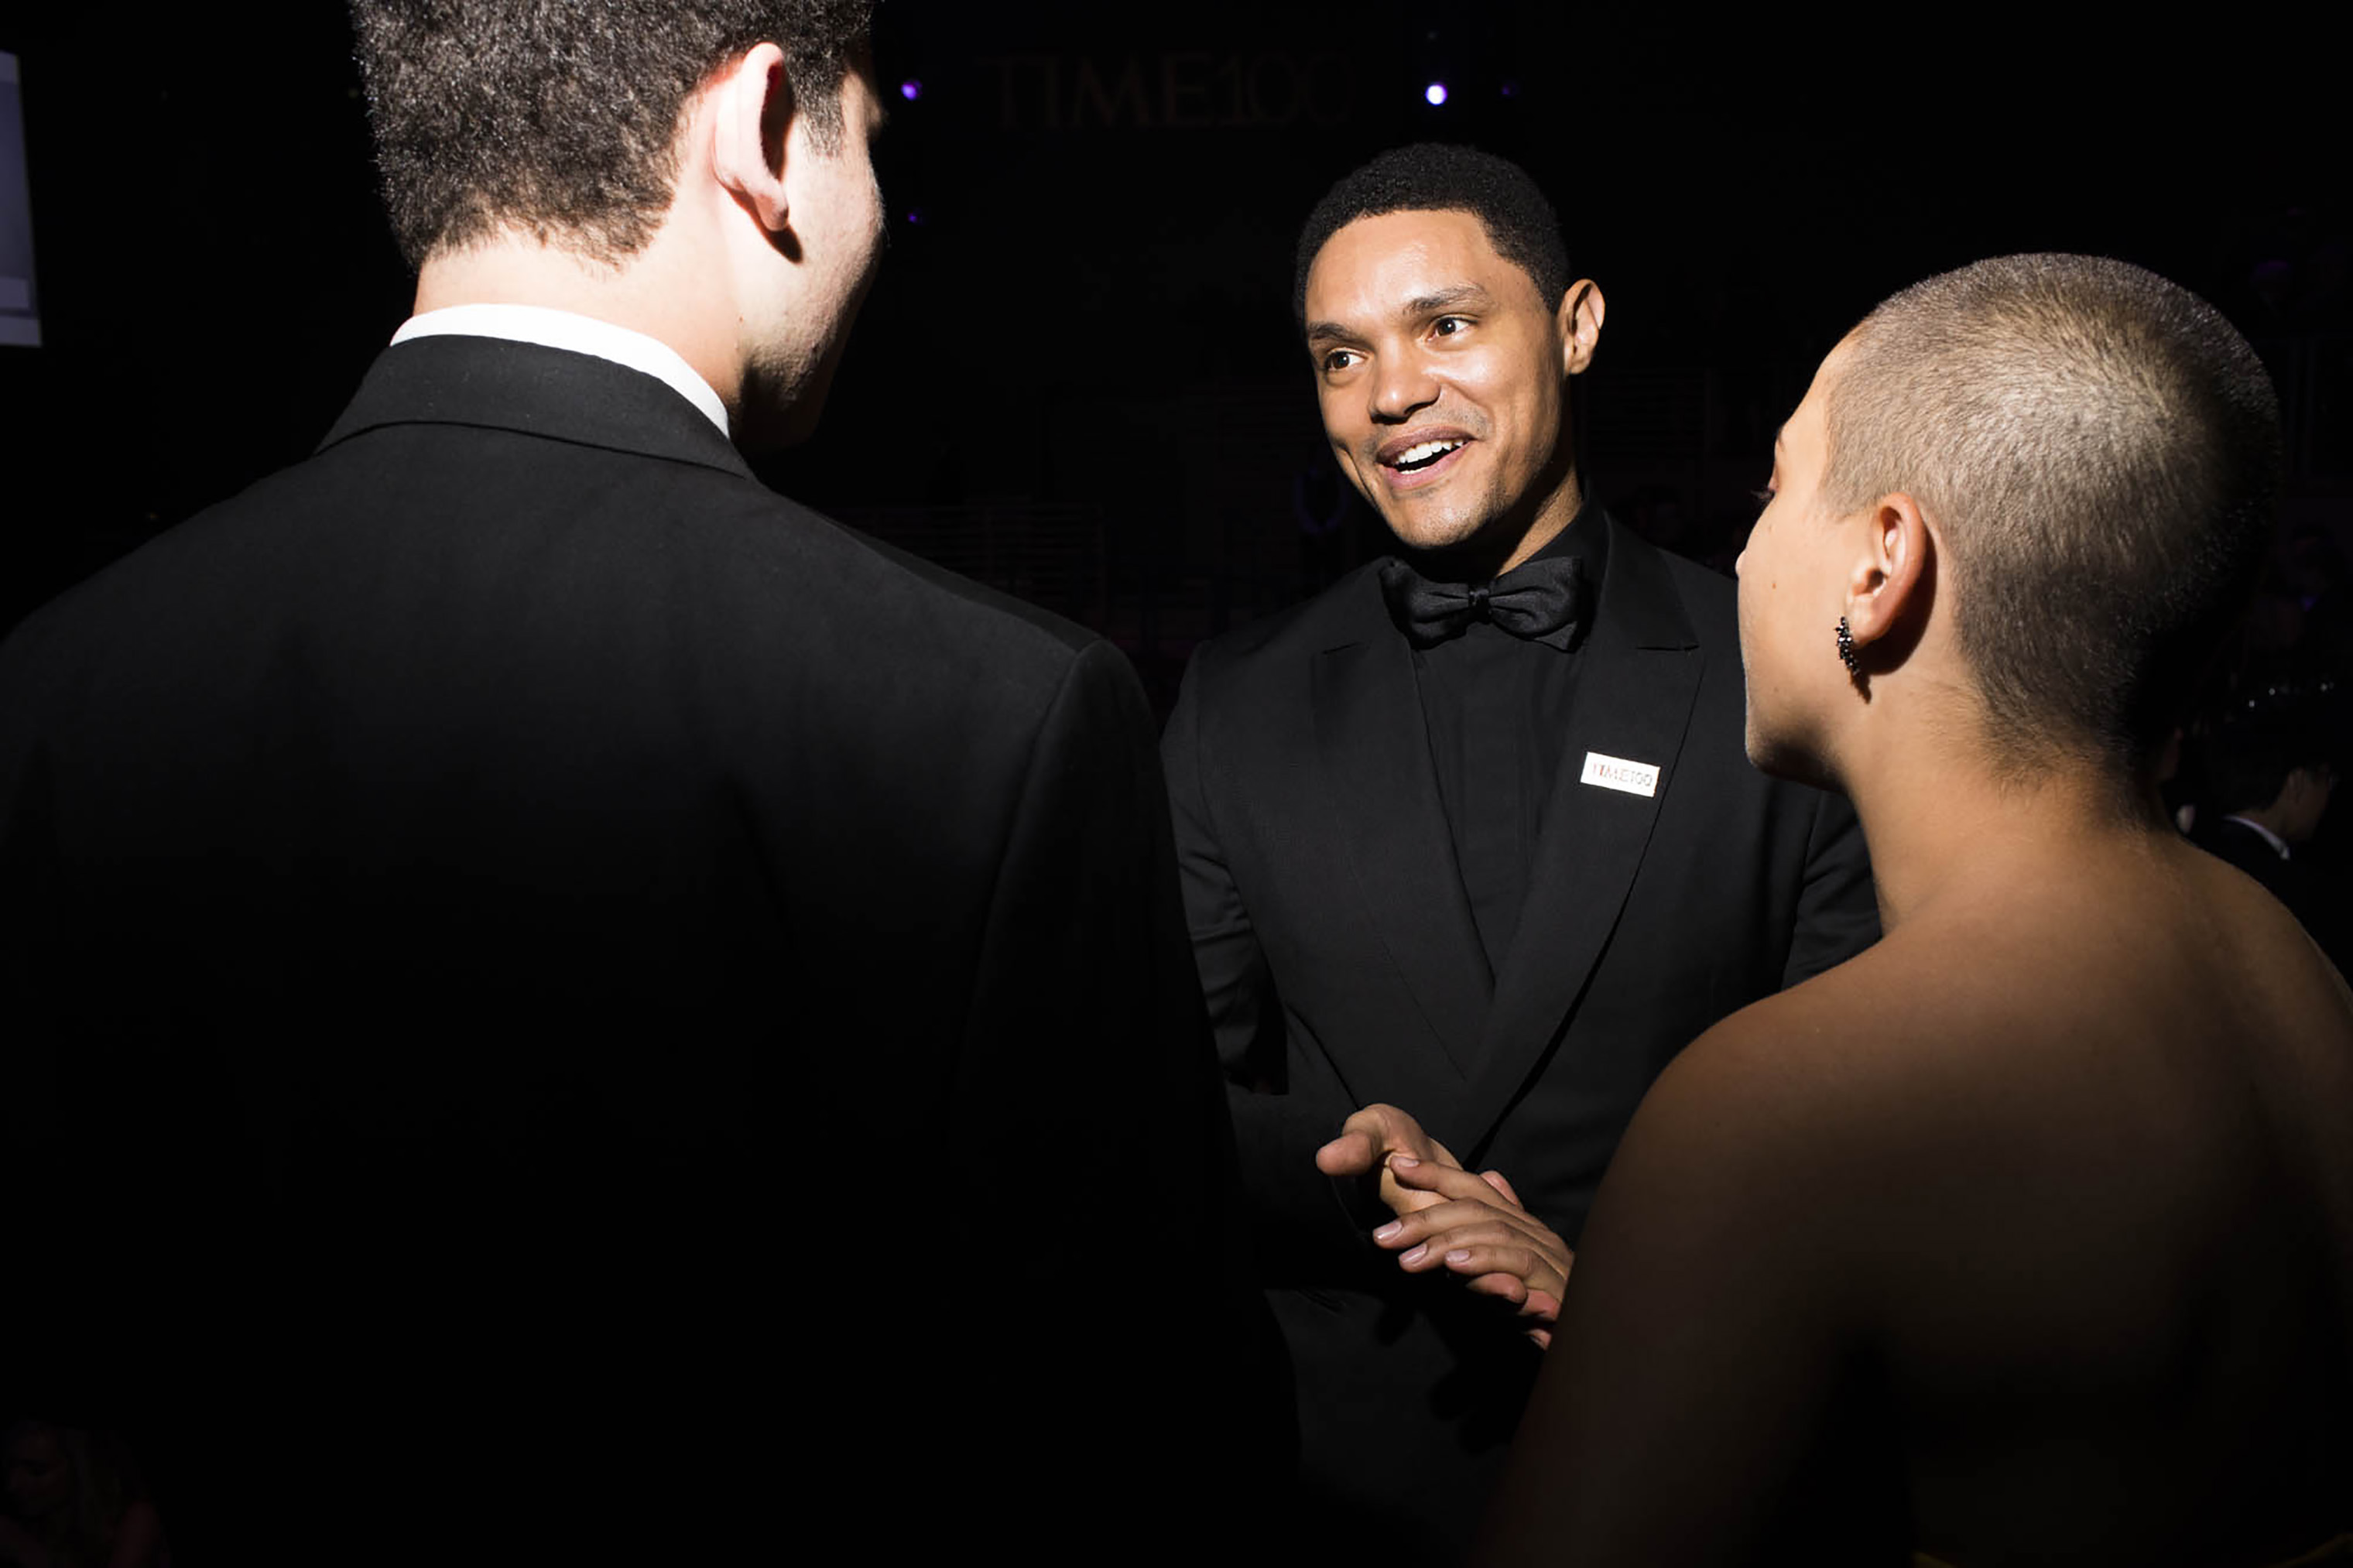 Trevor Noah speaks with Parkland activists Alex Wind and Emma Gonzalez at the Time 100 Gala at Jazz at Lincoln Center on April 24, 2018 in New York City. (Landon Nordeman for TIME)